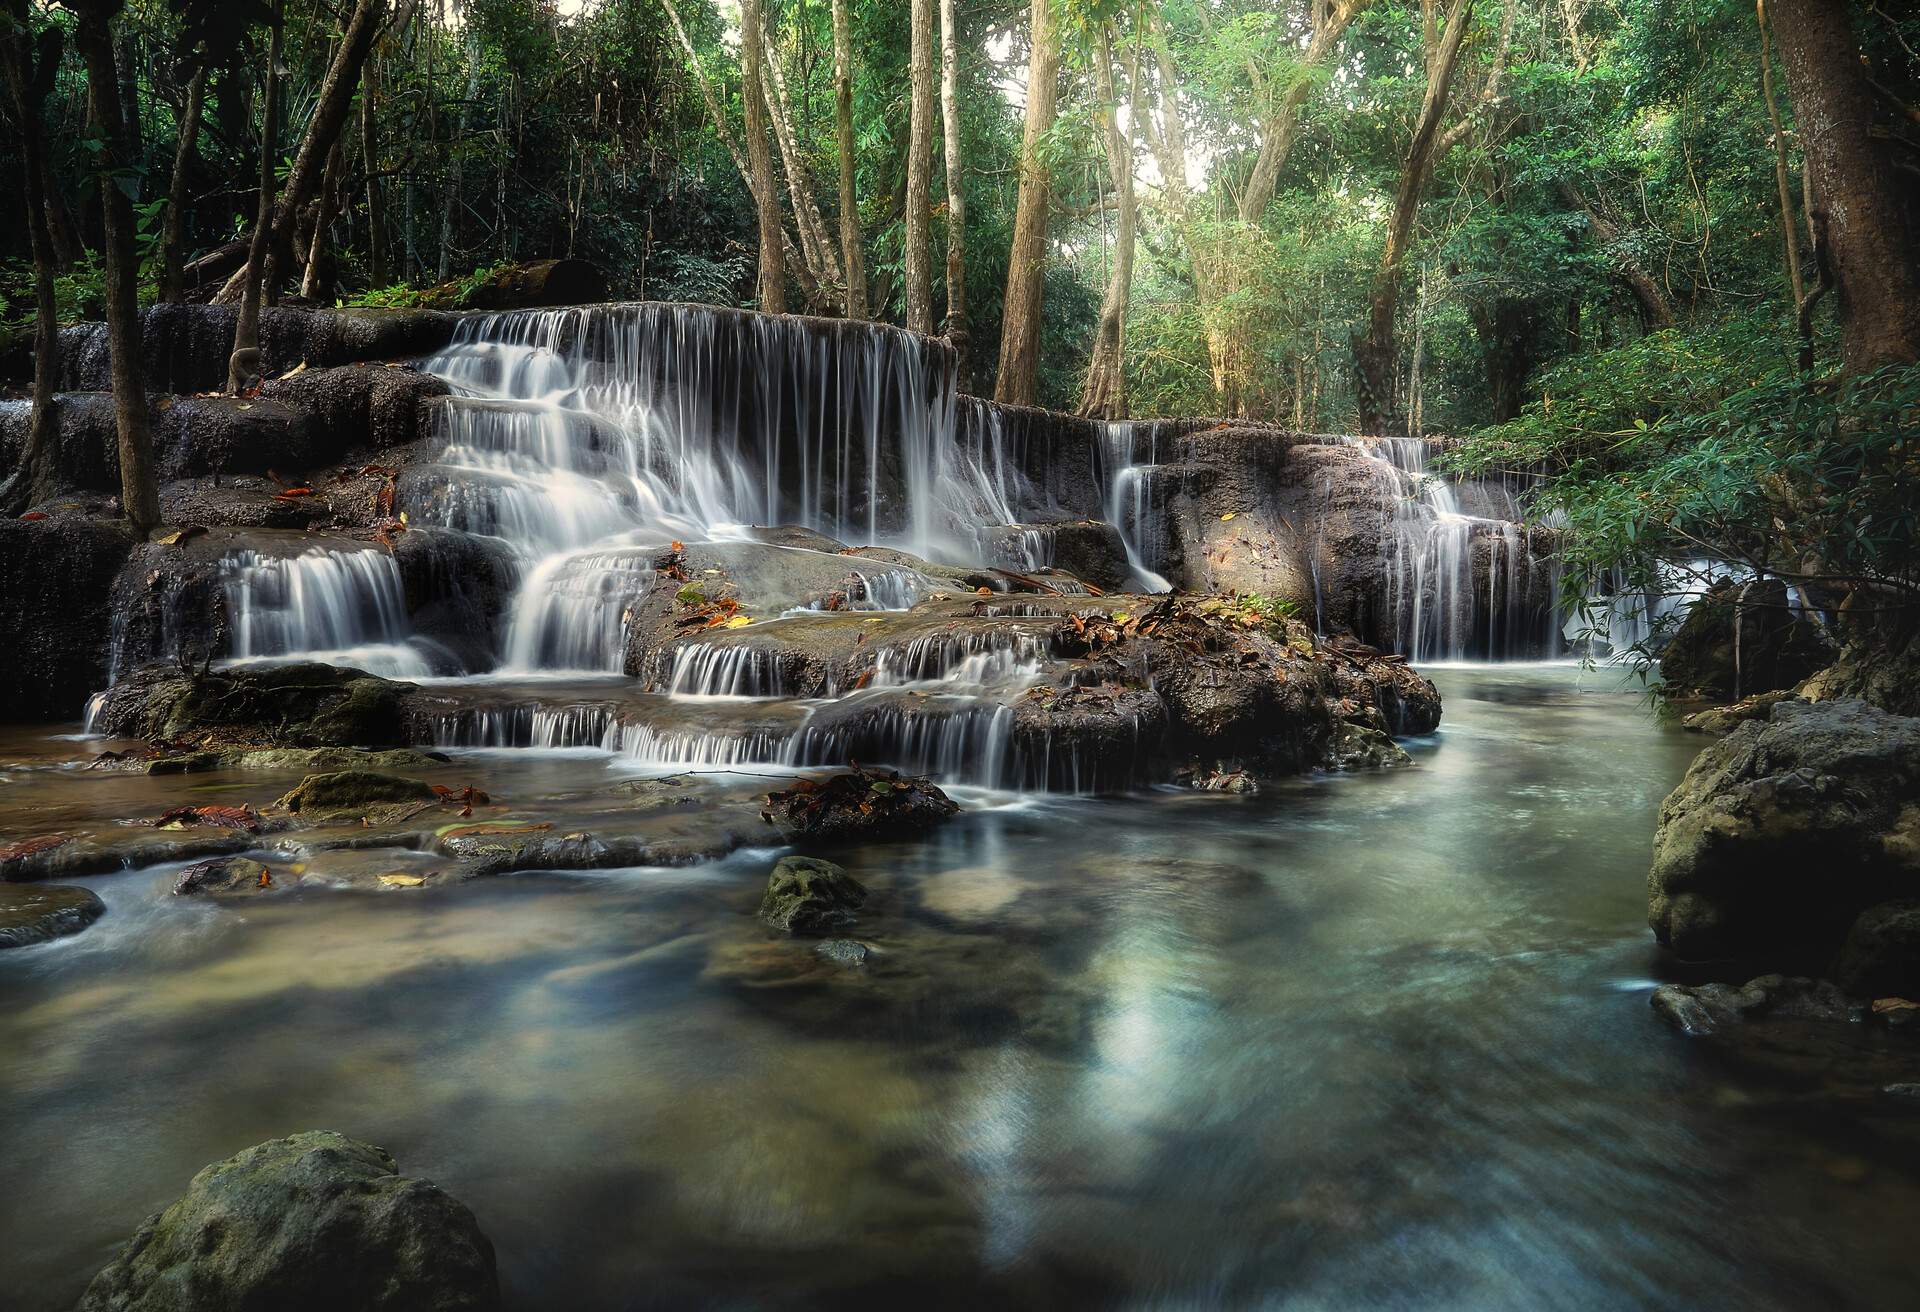 DEST_THAILAND_Si-Nakharin-National-Park_Huay Mae Khamin Waterfall_GettyImages-1254949817